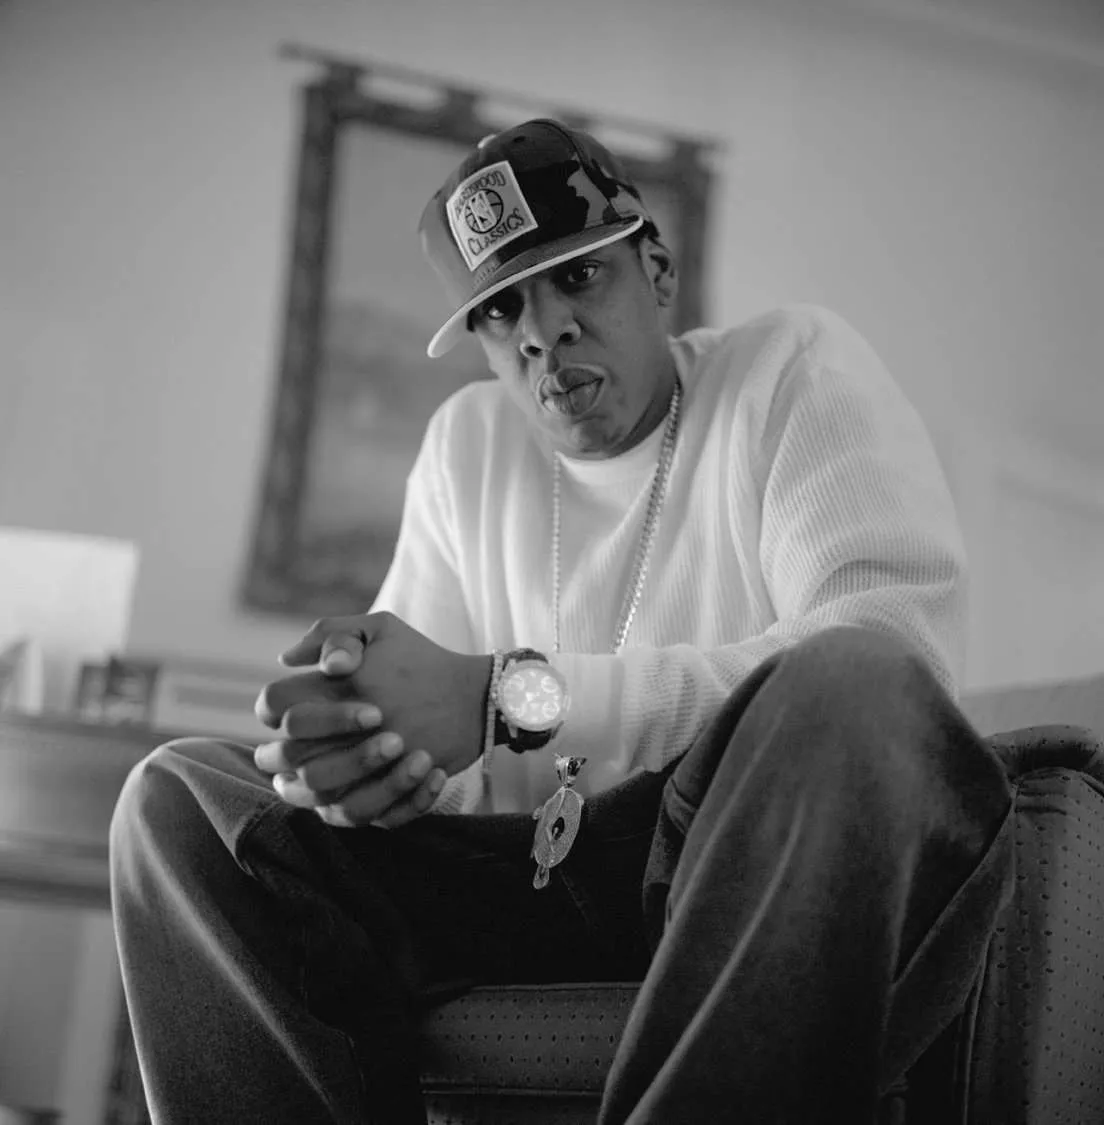 Jay Z with a roc a fella Chain and hat on